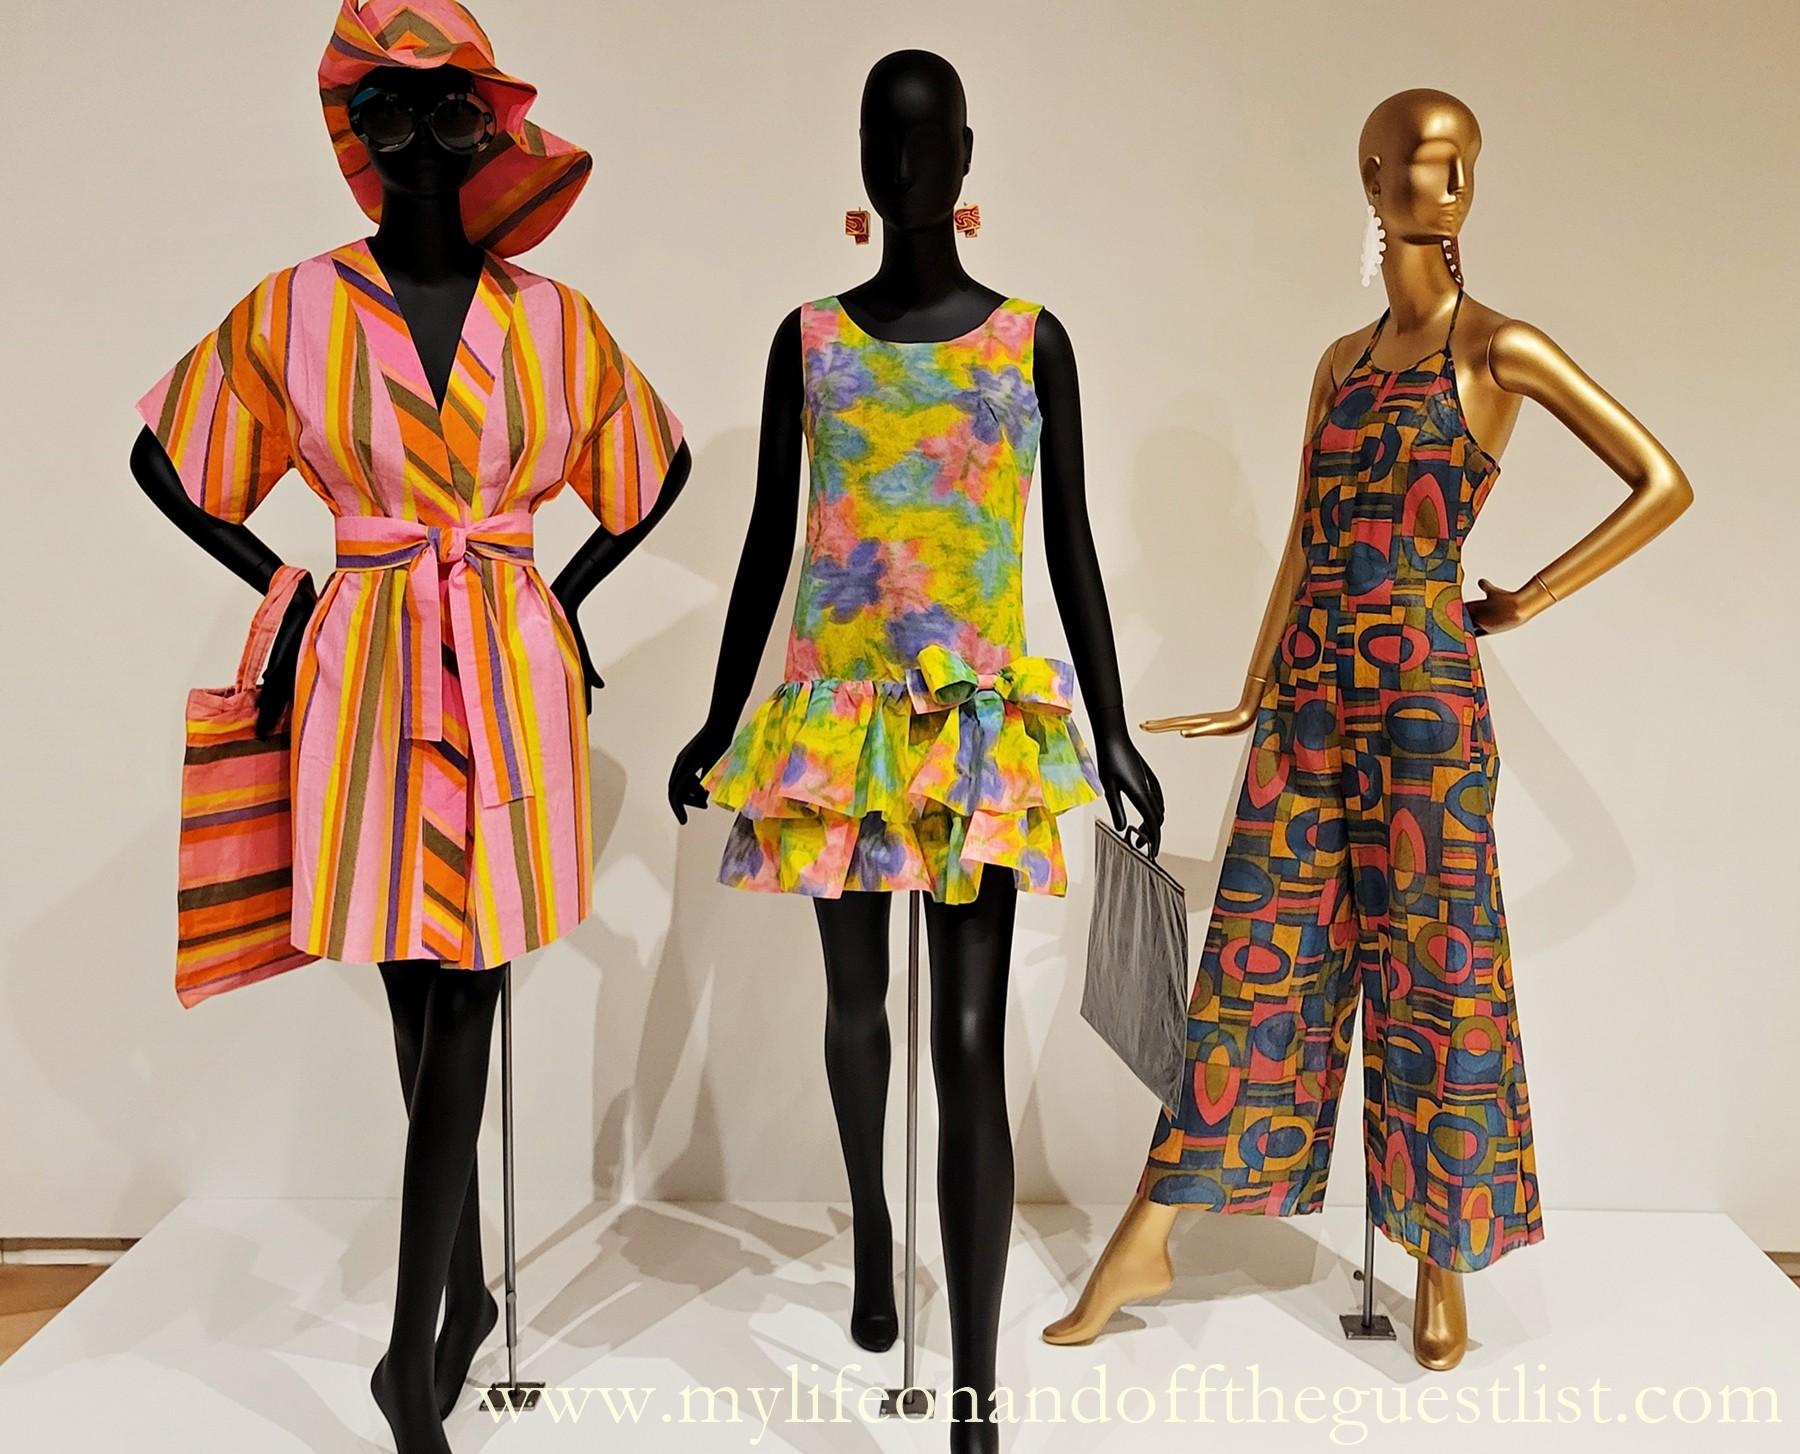 Generation Paper: A Fashion Phenom of the 1960s Exhibit